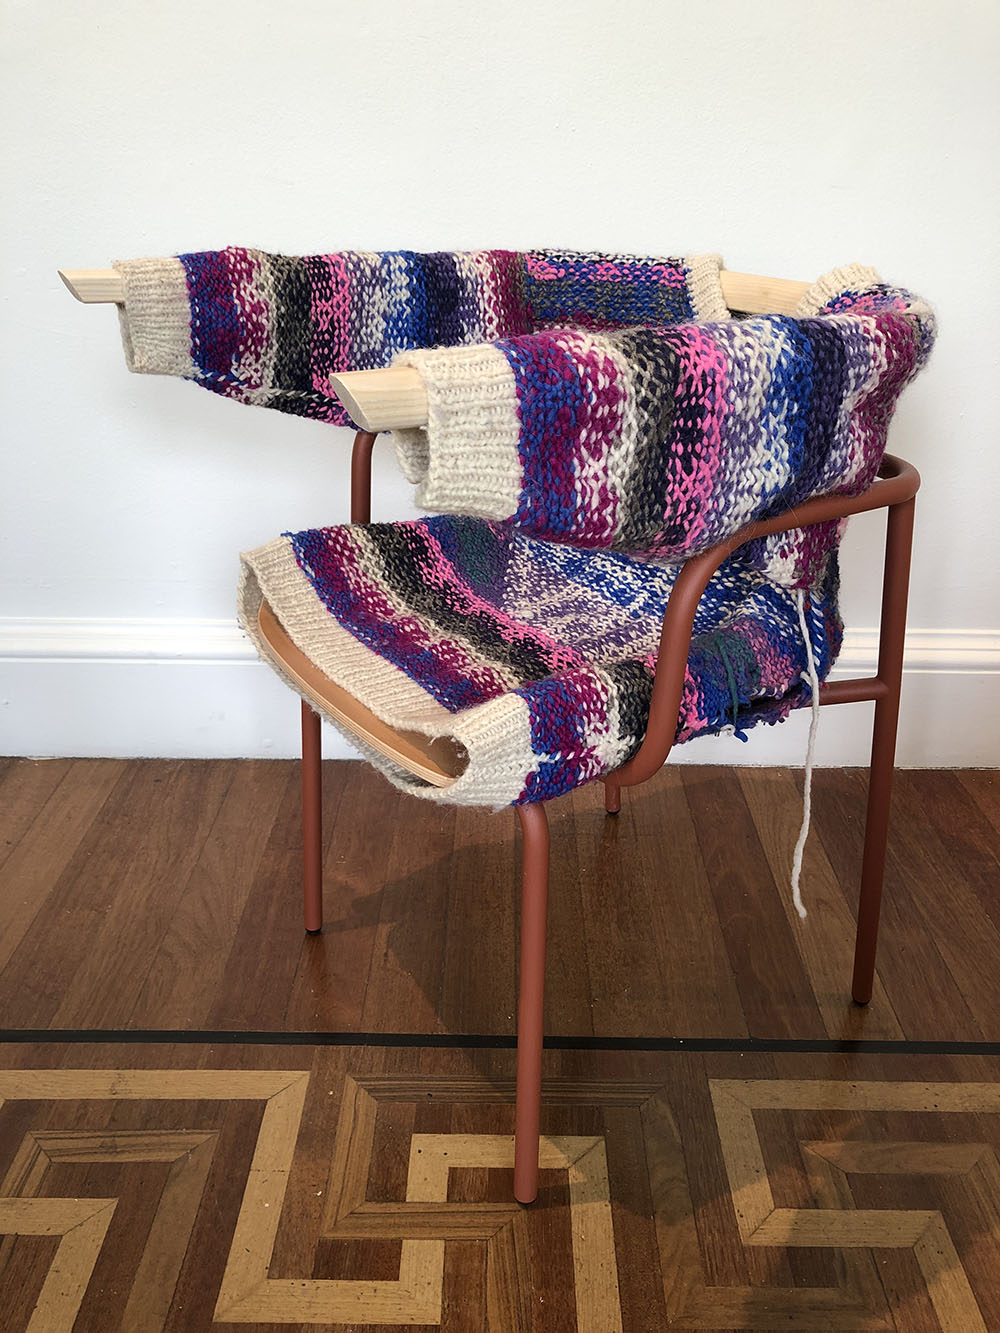 The Jumper Chair for auction at SCP, London, 12 October, 6.00-9.00pm